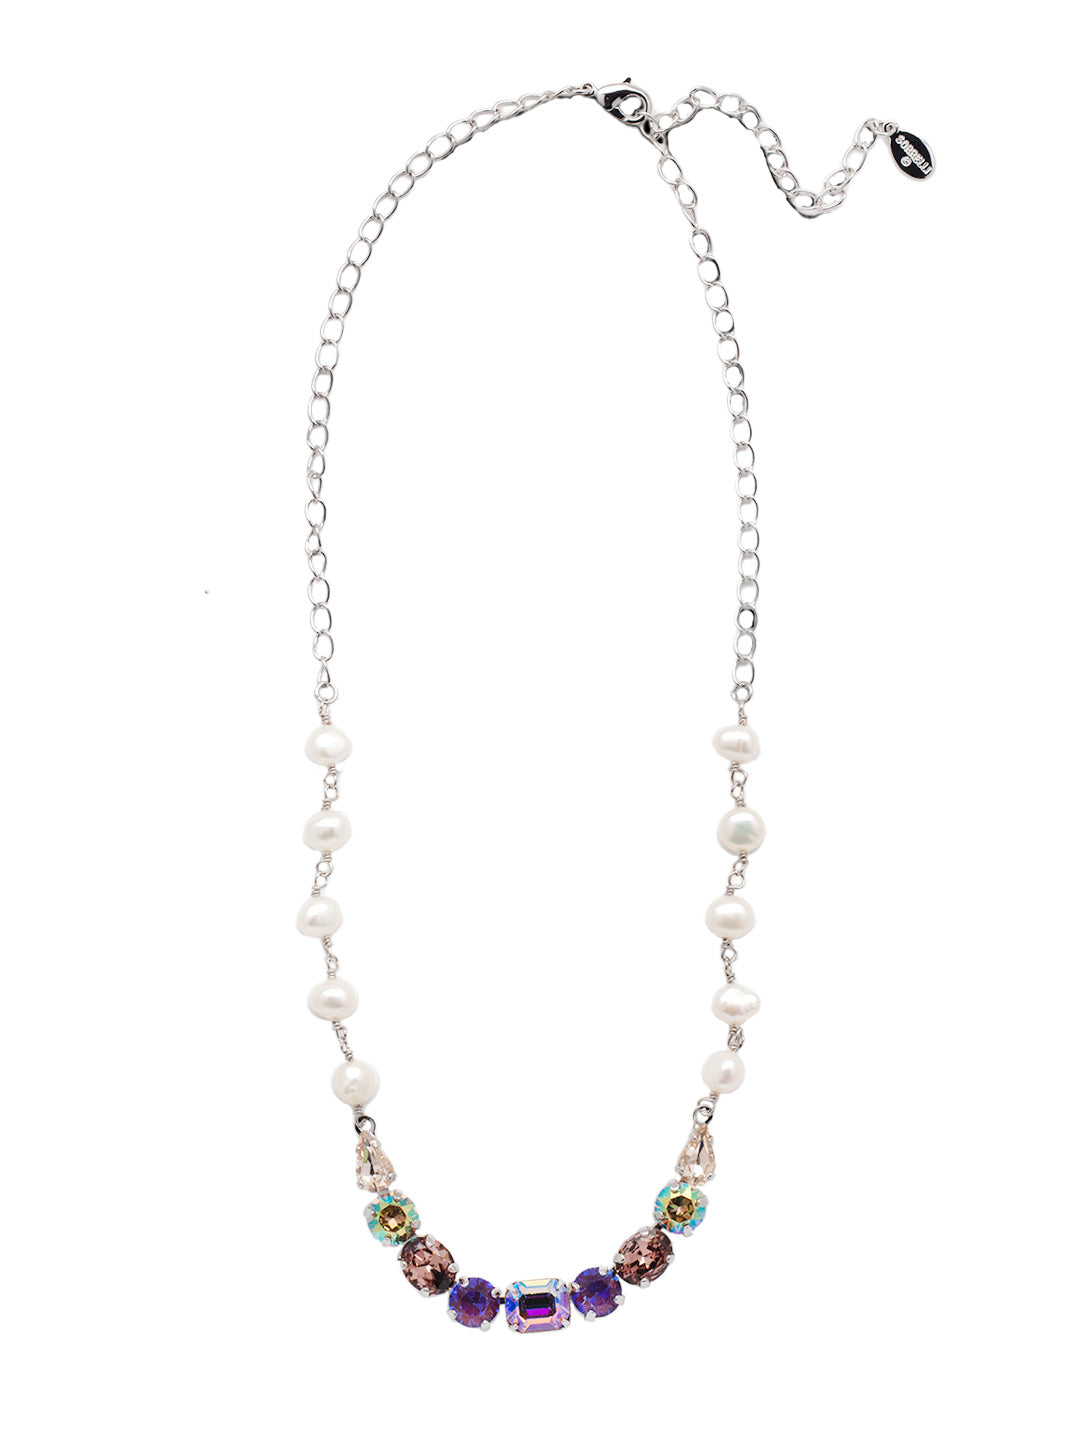 Libby Tennis Necklace - NEU99PDSIP - <p>The Libby Tennis Necklace hosts a string of freshwater pearls and assorted crystals, secured on an adjustable chain with a lobster clasp closure. From Sorrelli's Sienna Plum collection in our Palladium finish.</p>